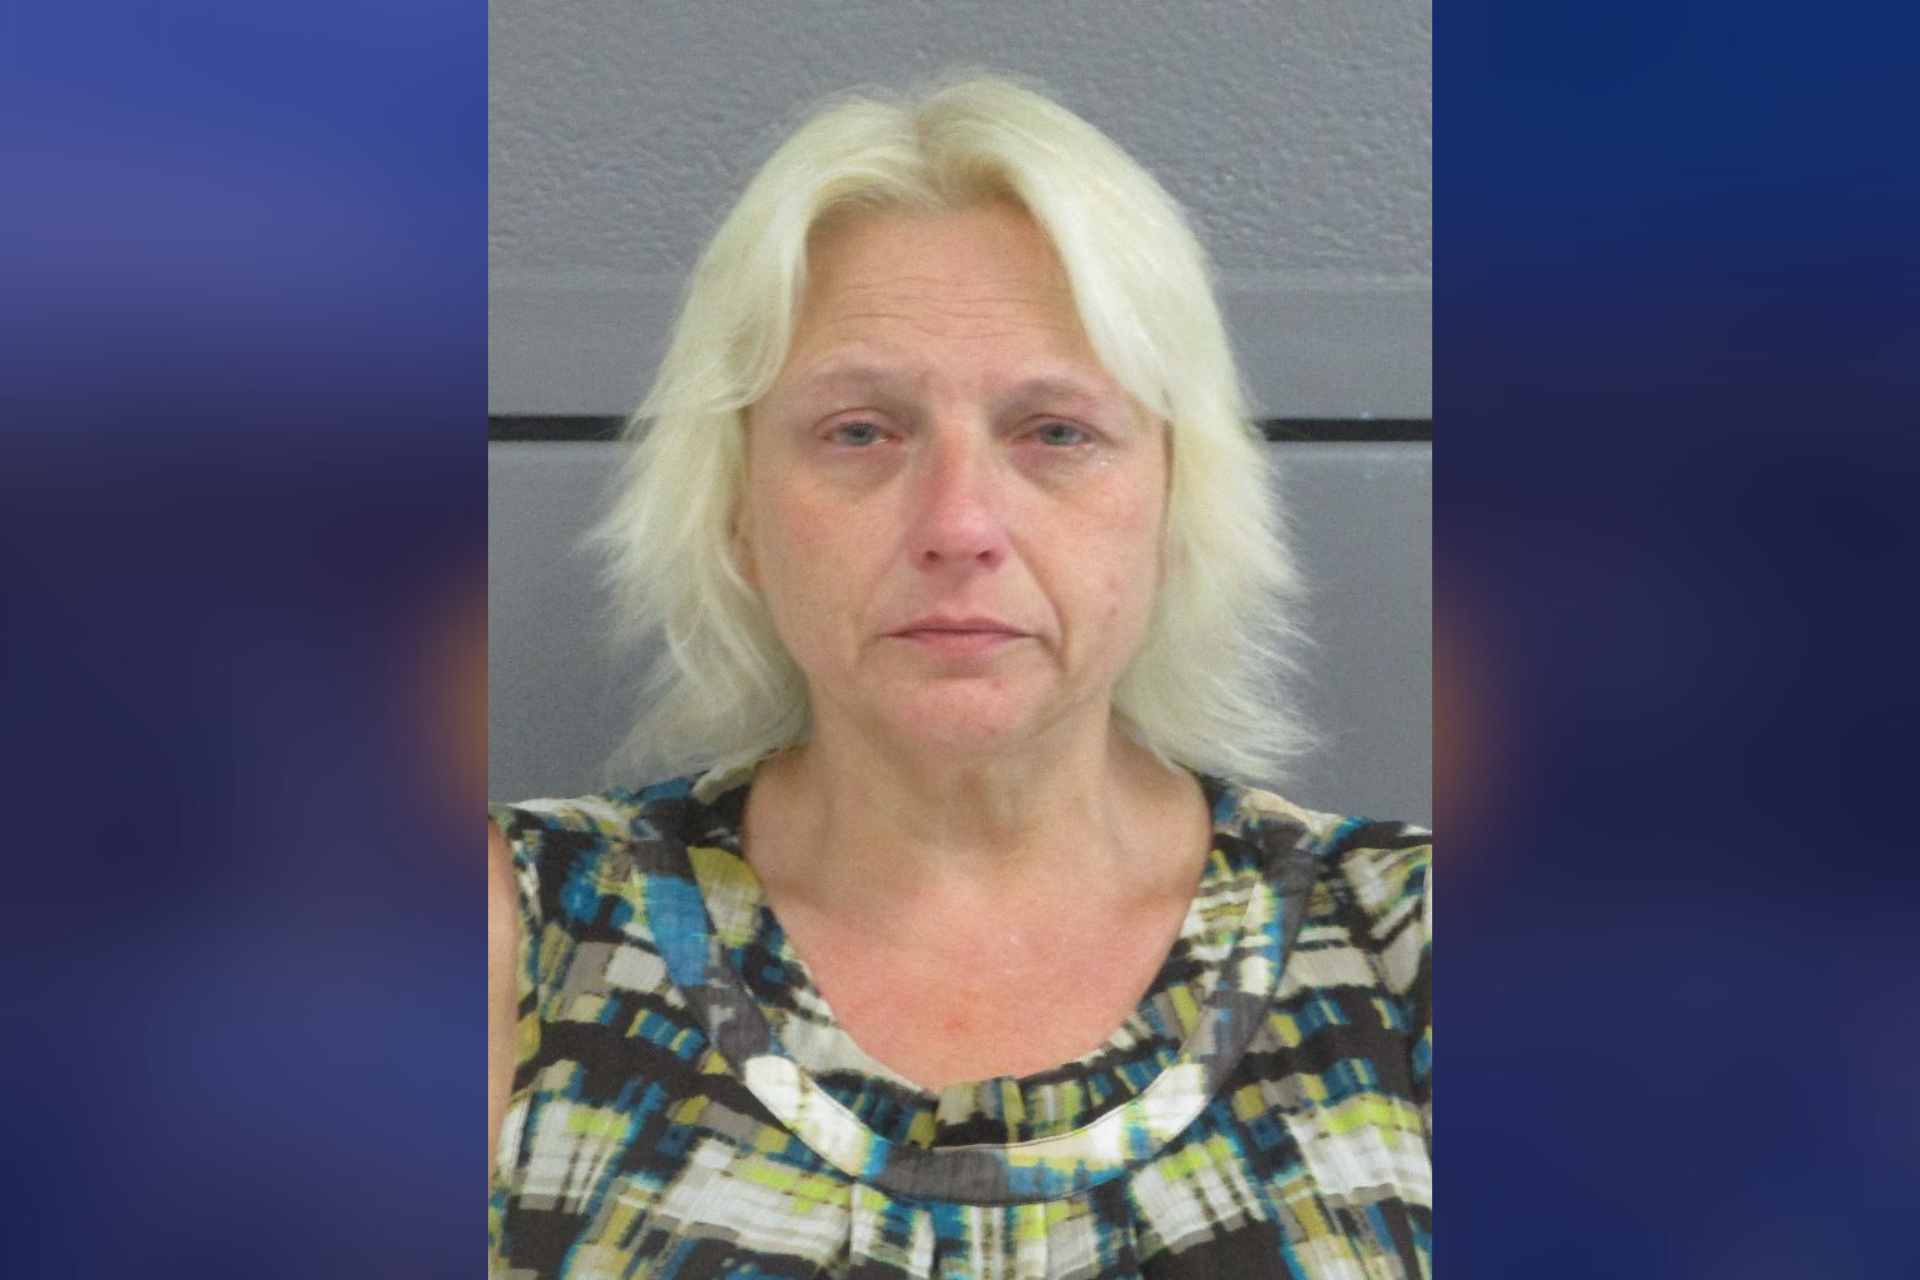 Woman arrested for allegedly aiding a sex offender after officers find wanted man at her residence